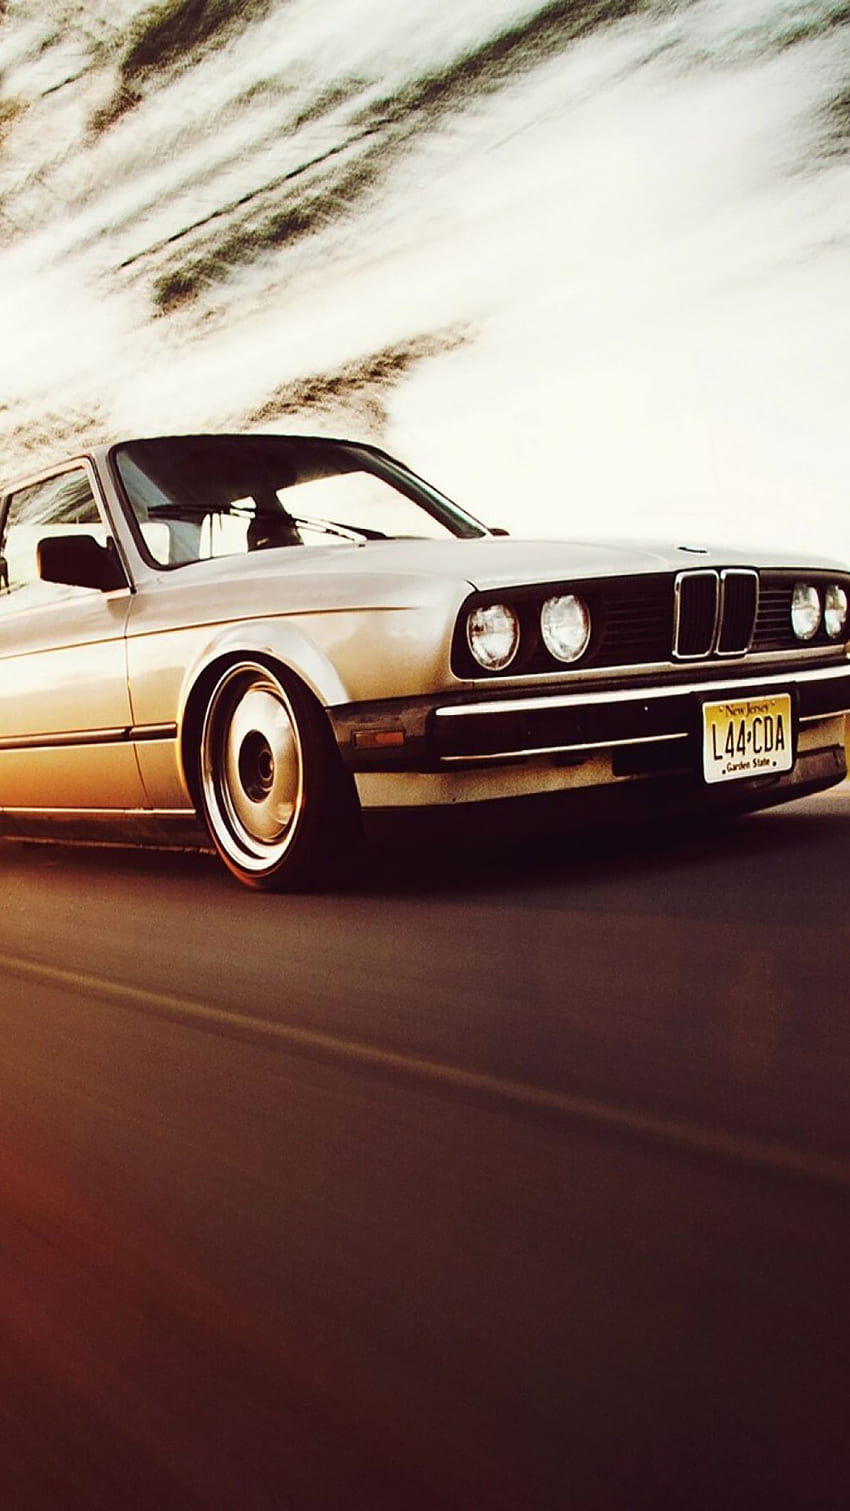 Vintage Cars BMW 3 Series for iPhone 11, Pro Max, X, 8, 7, 6 - on 3, BMW Retro HD phone wallpaper